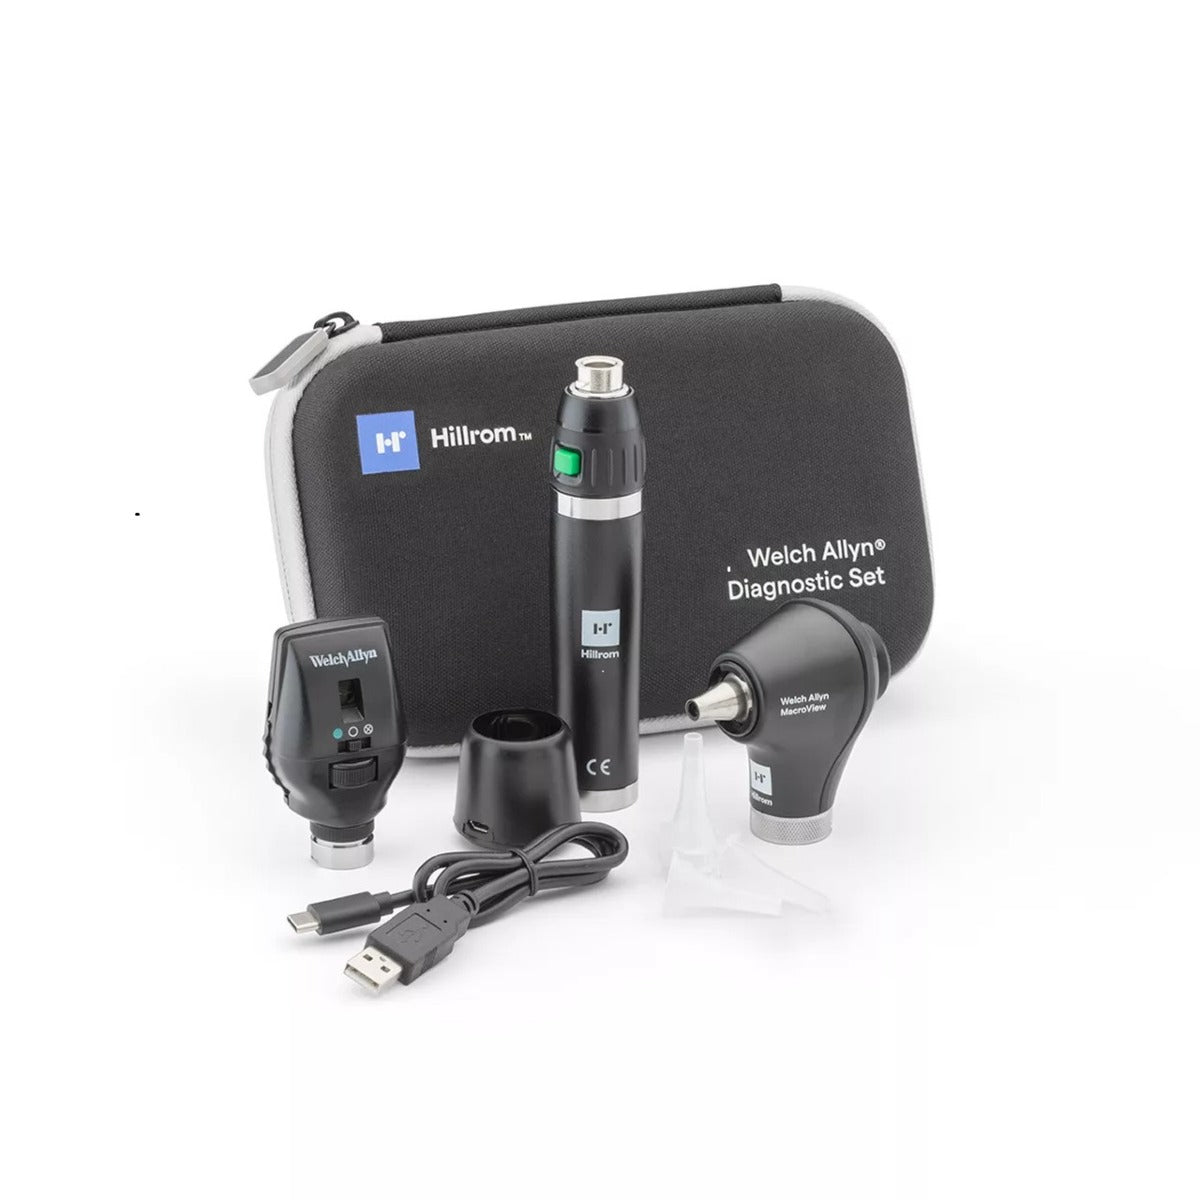 3.5V Diagnostic Set with Coaxial LED Ophthalmoscope, MacroView Basic LED  Otoscope